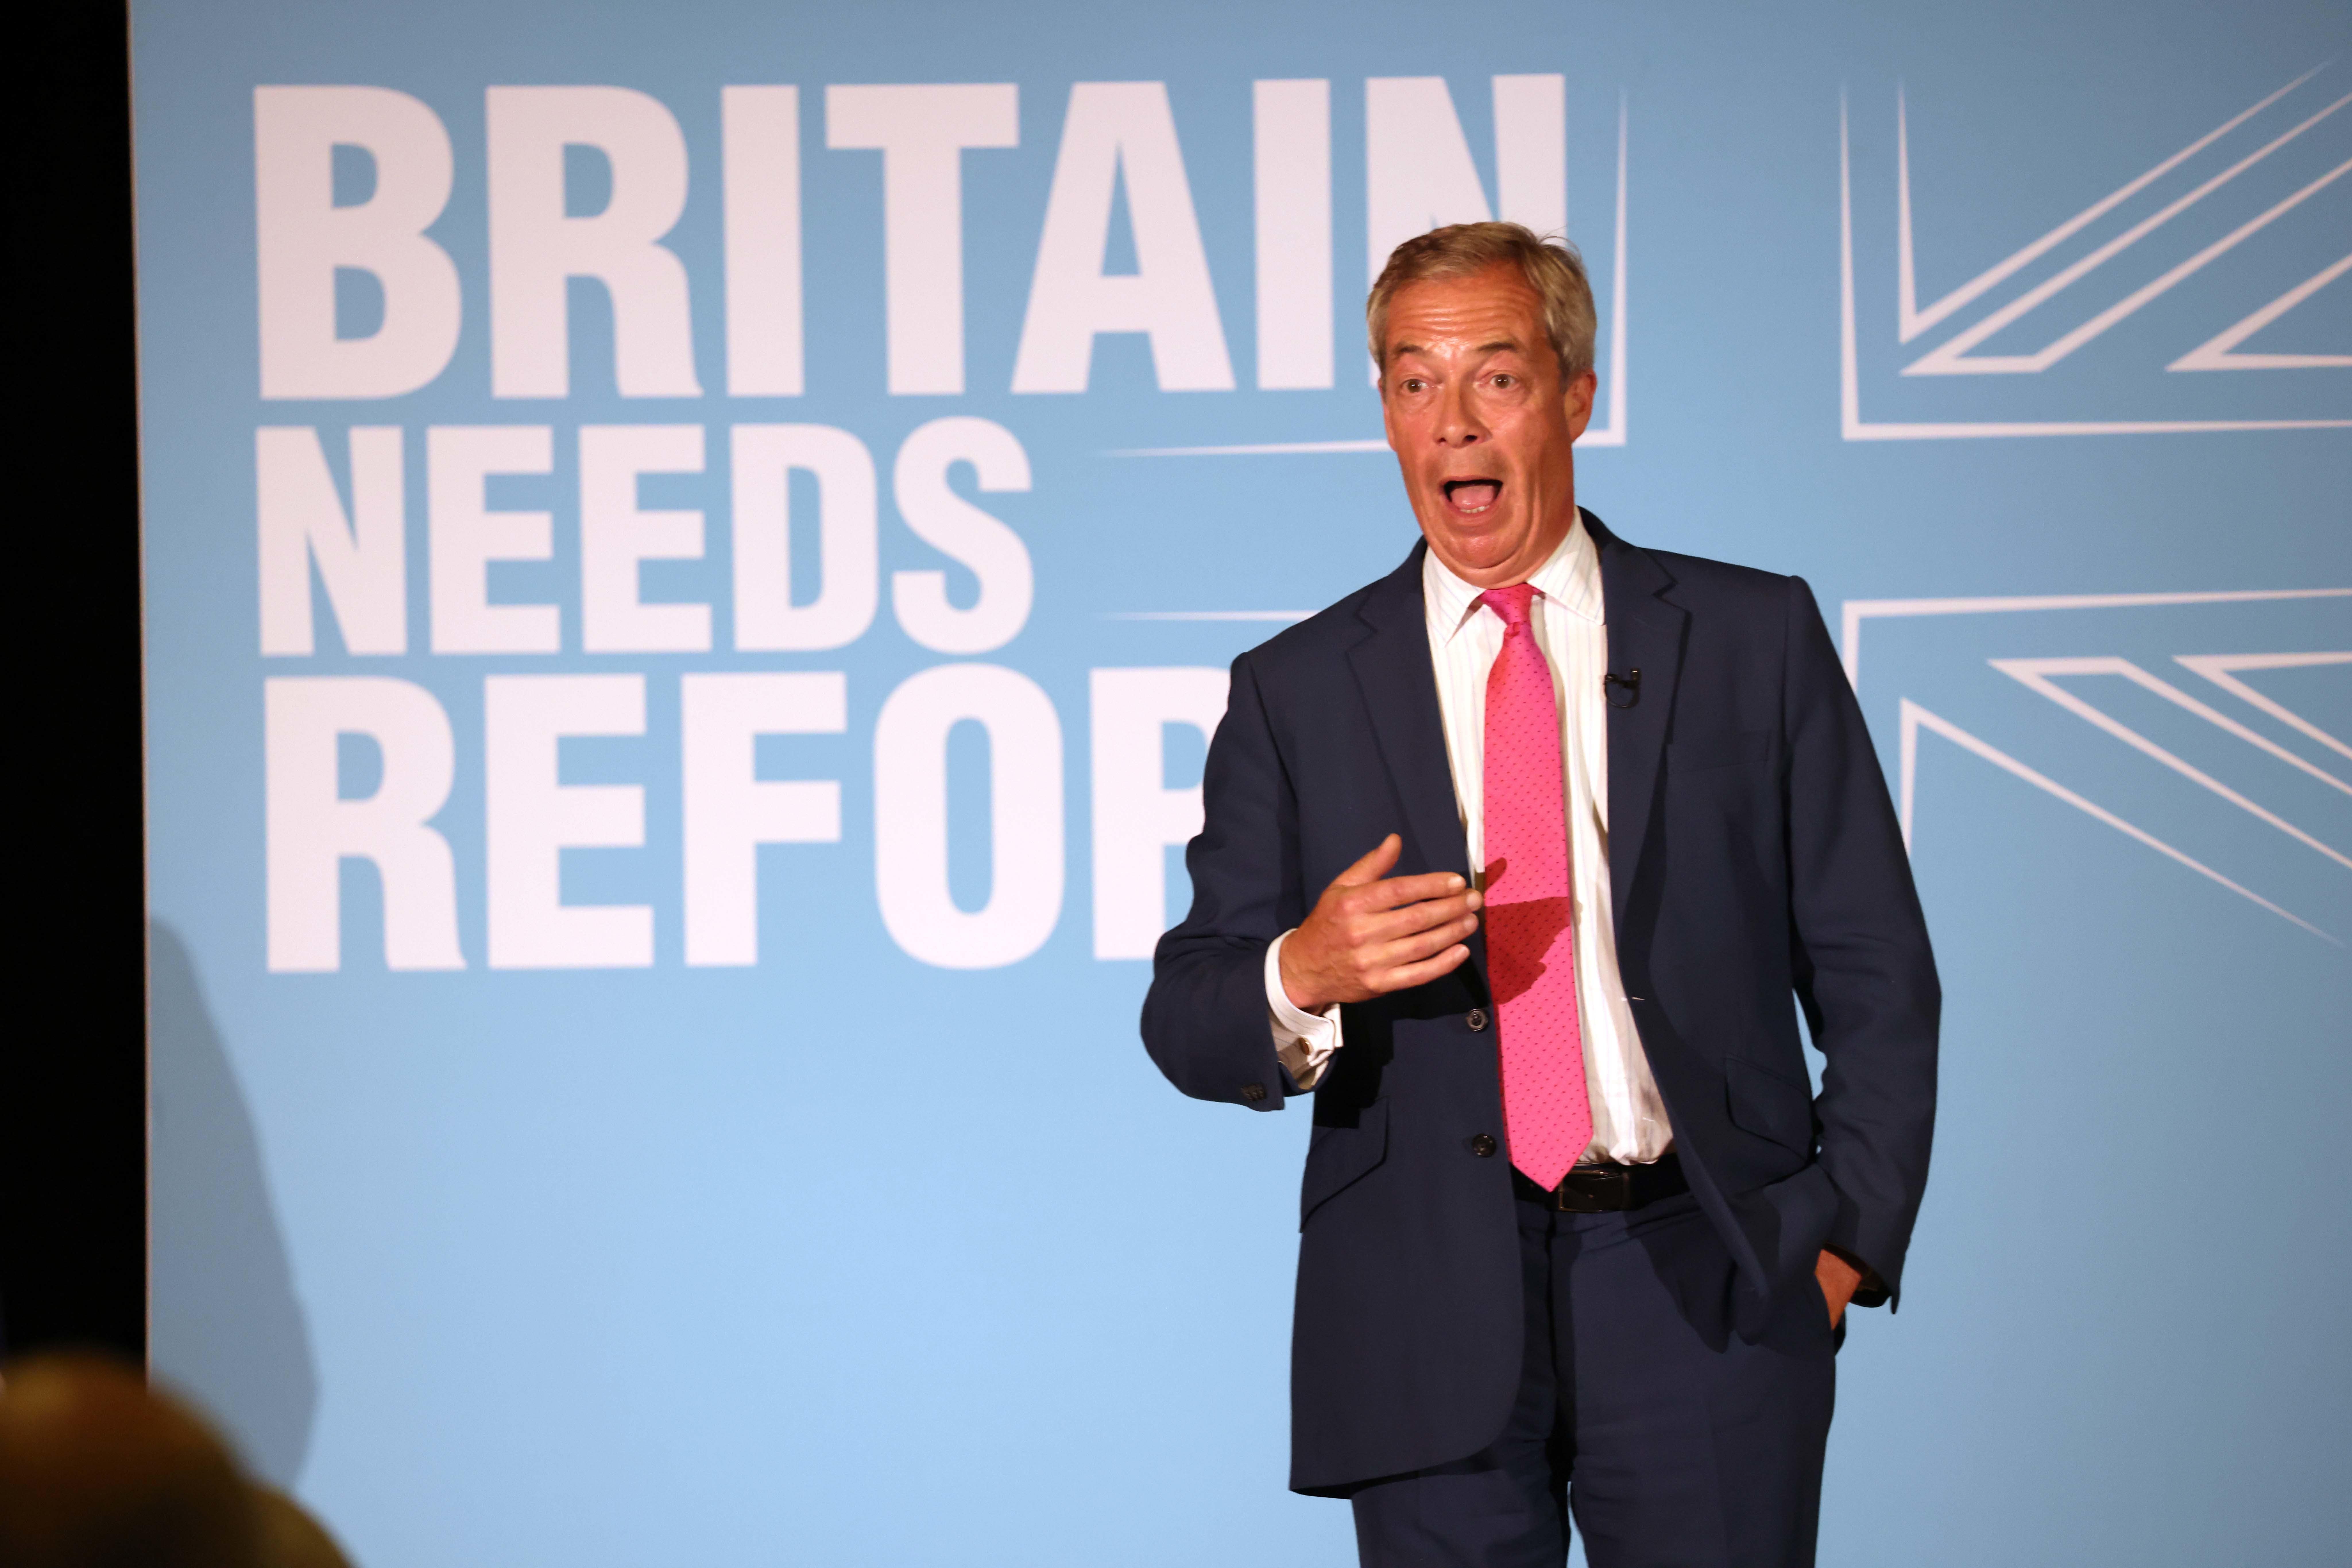 Reform UK leader Nigel Farage is also embroiled in a dispute with the BBC (Paul Marriott/PA)